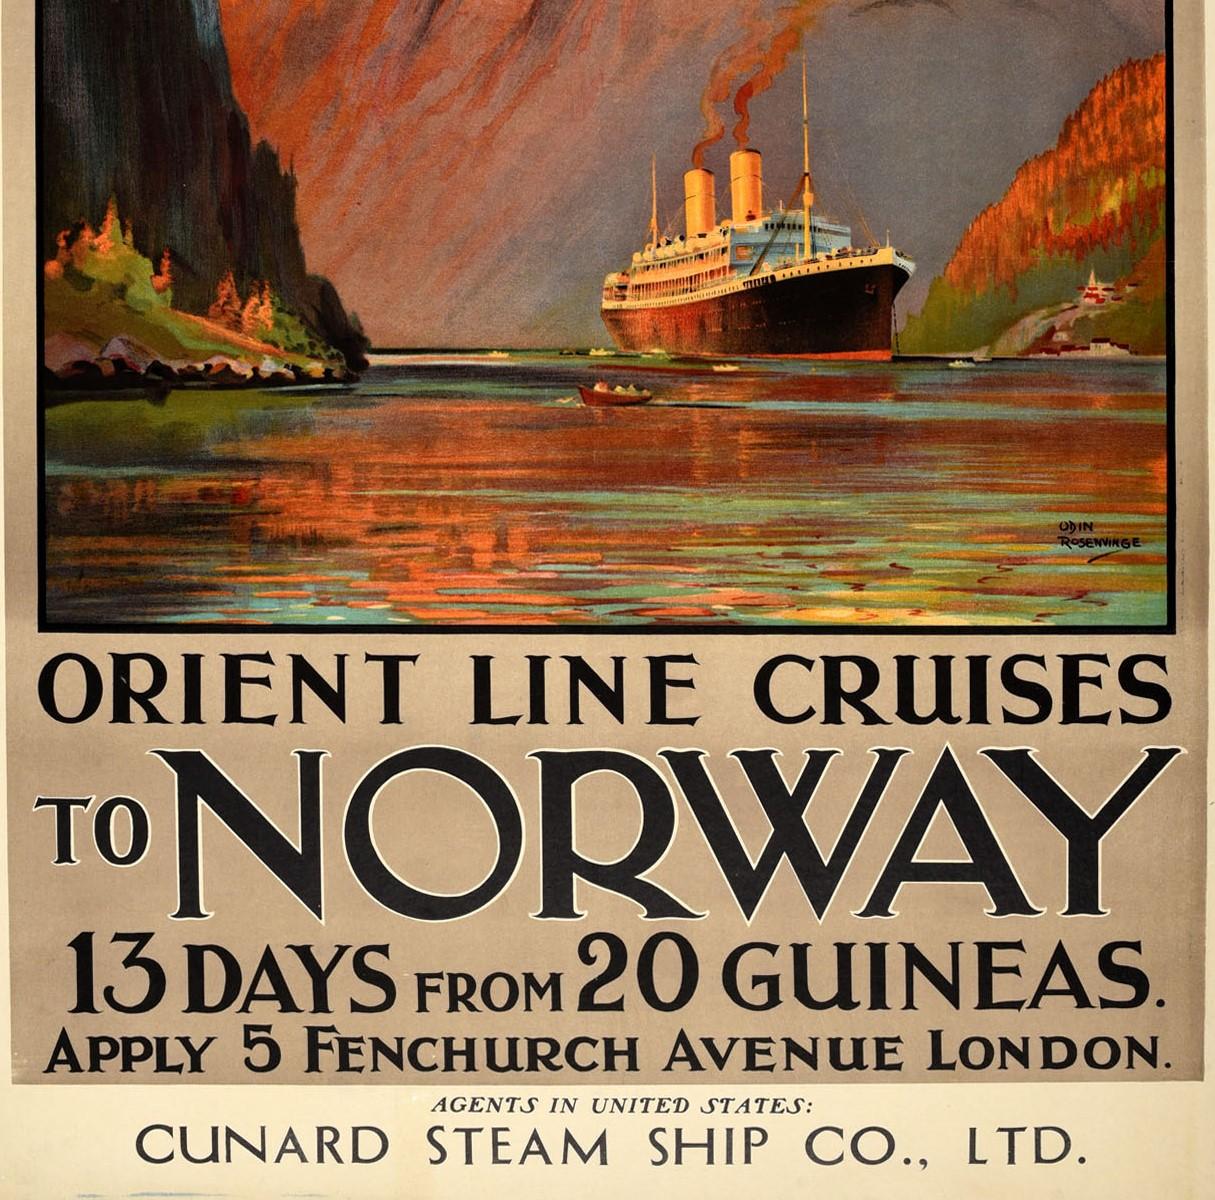 1902 A4 Glossy Vintage Cruise Line Poster Art Print Clyde Shipping Co Ltd